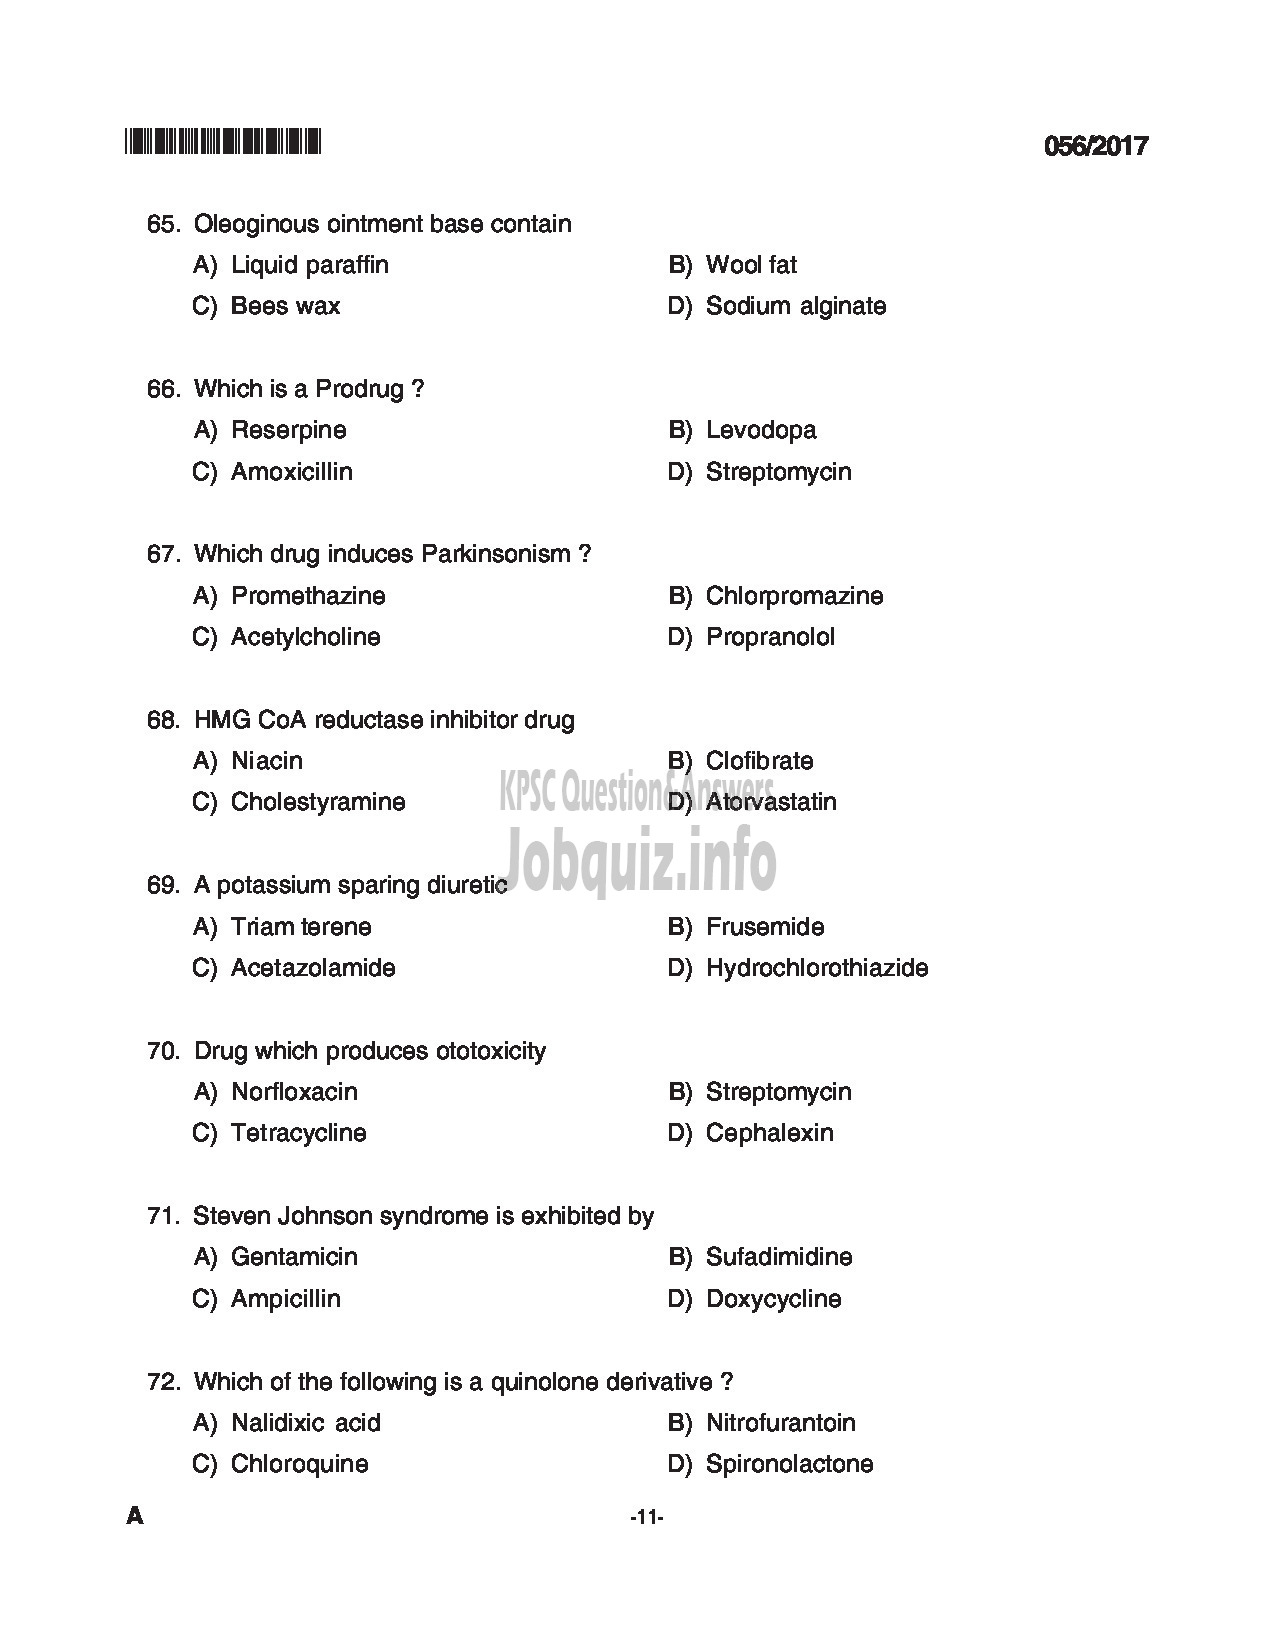 Kerala PSC Question Paper - PHARMACIST GRADE II INSURANCE MEDICAL SERVICES QUESTION PAPER-11